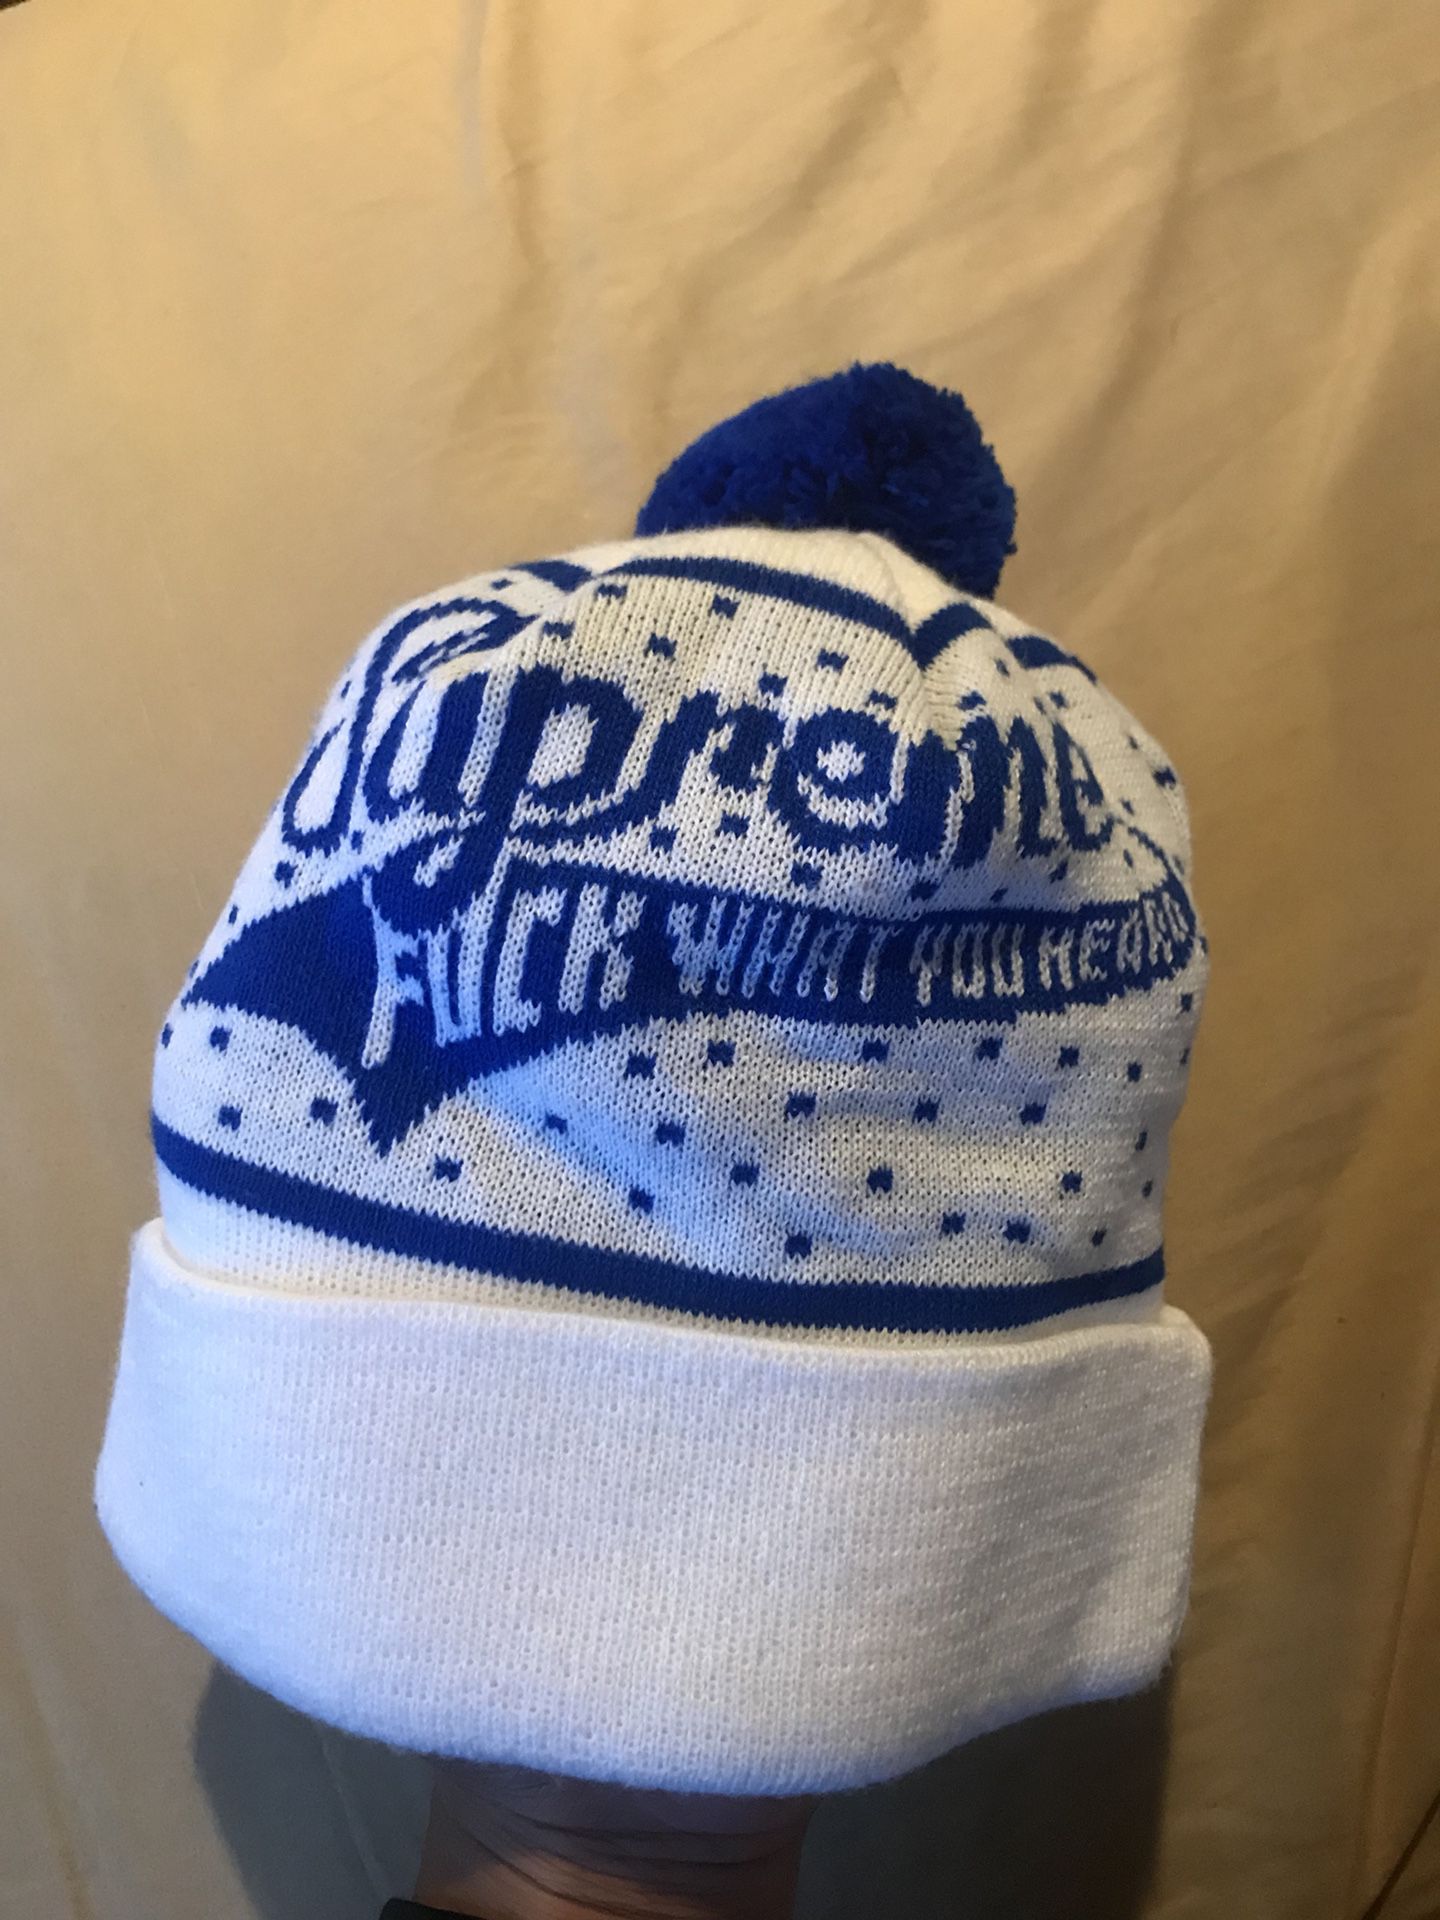 Supreme “fuck what you heard” beanie for Sale in Cleveland, OH - OfferUp